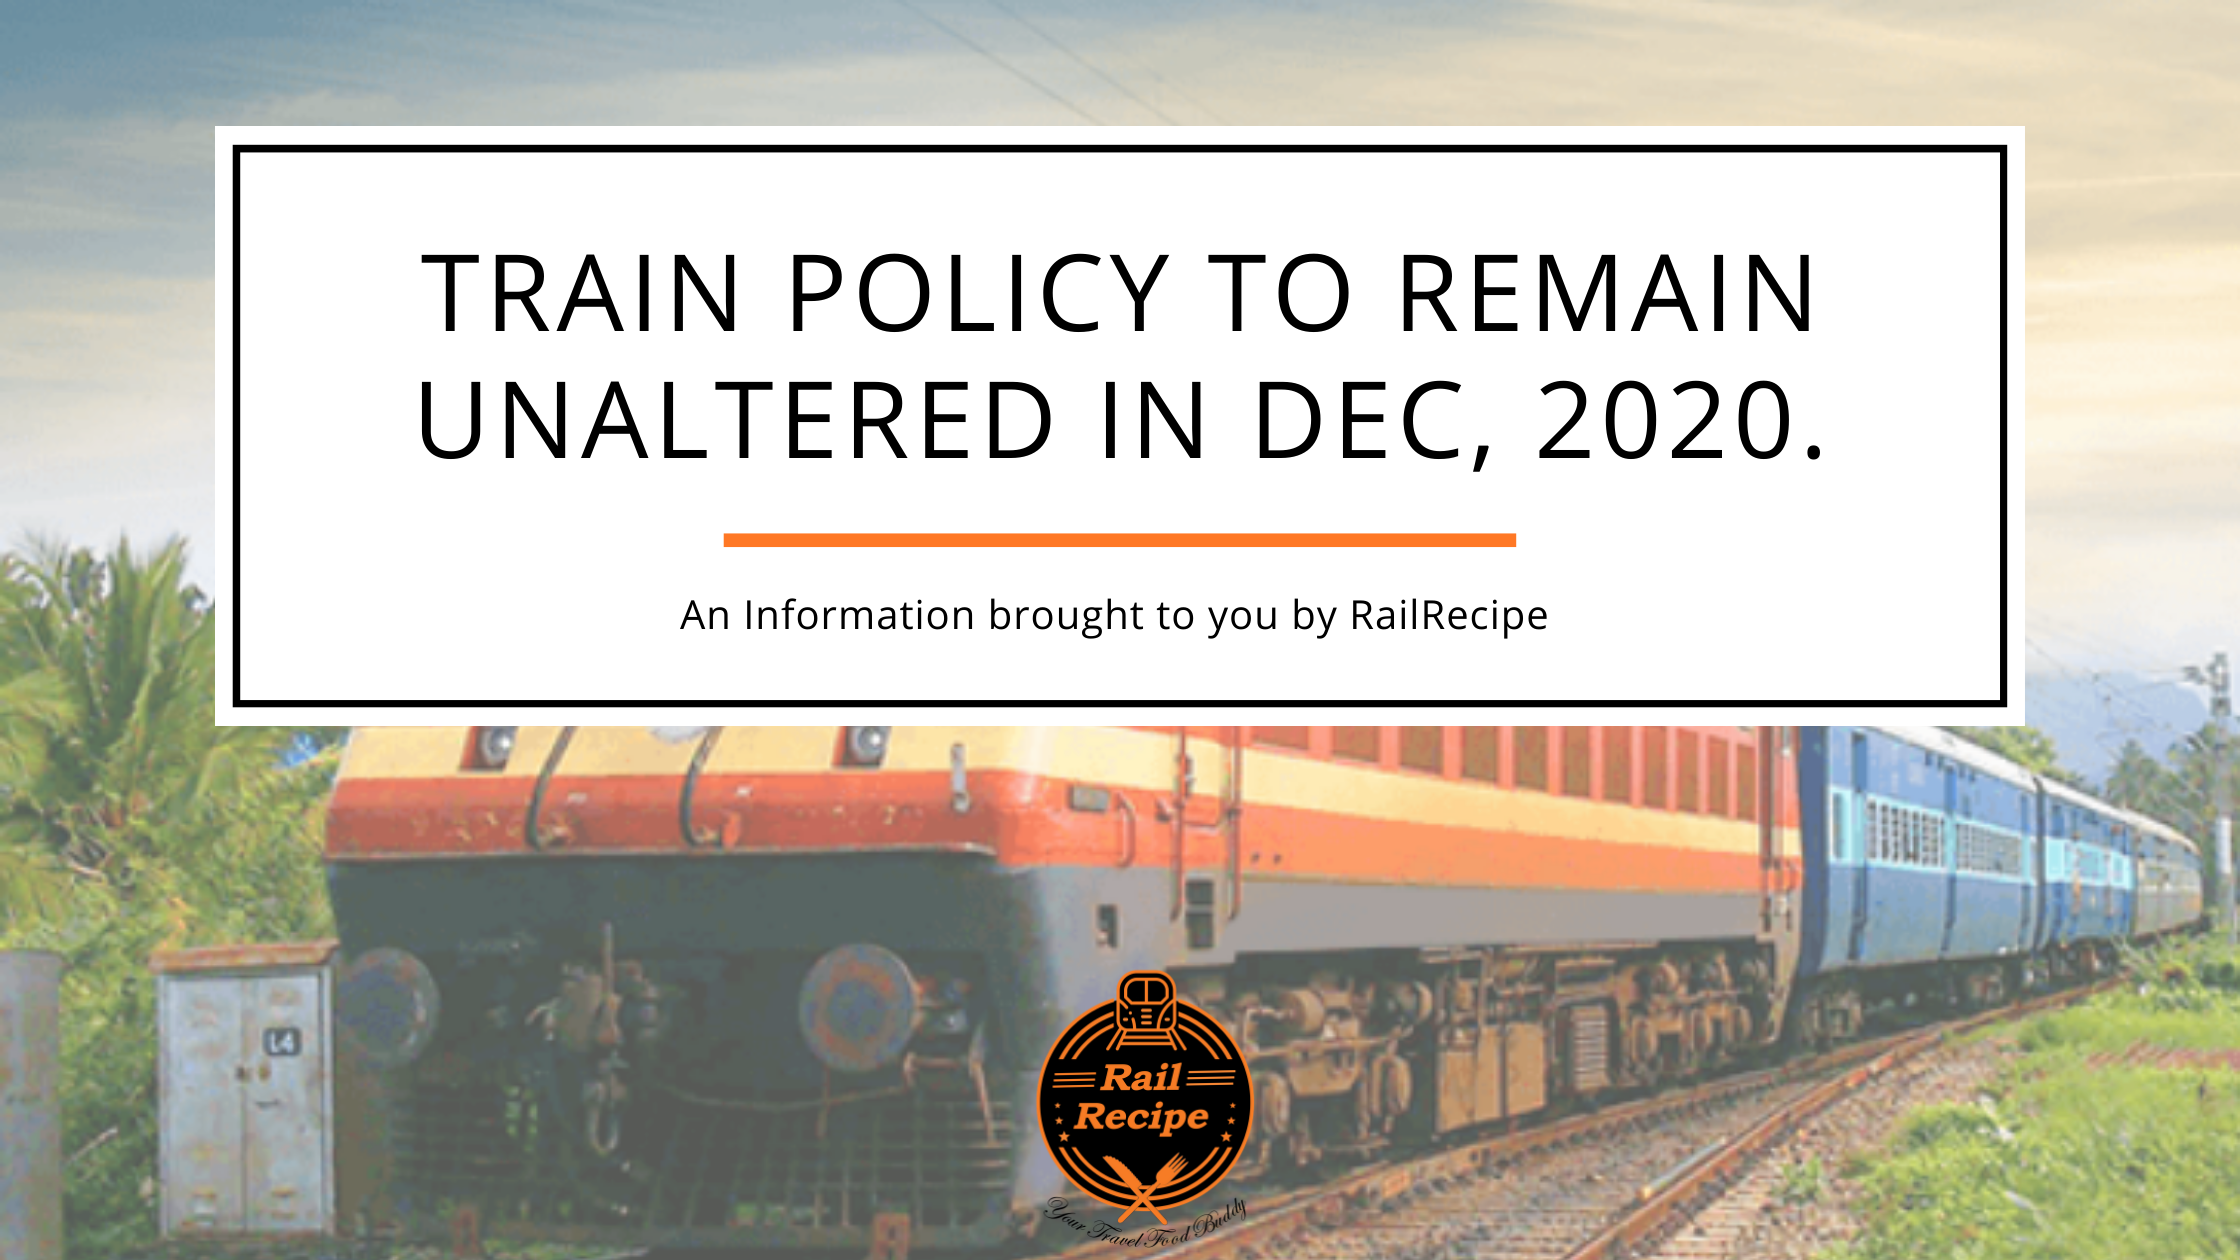 A RailRecipe repot on Train Policy to remain unaltered in December,2020